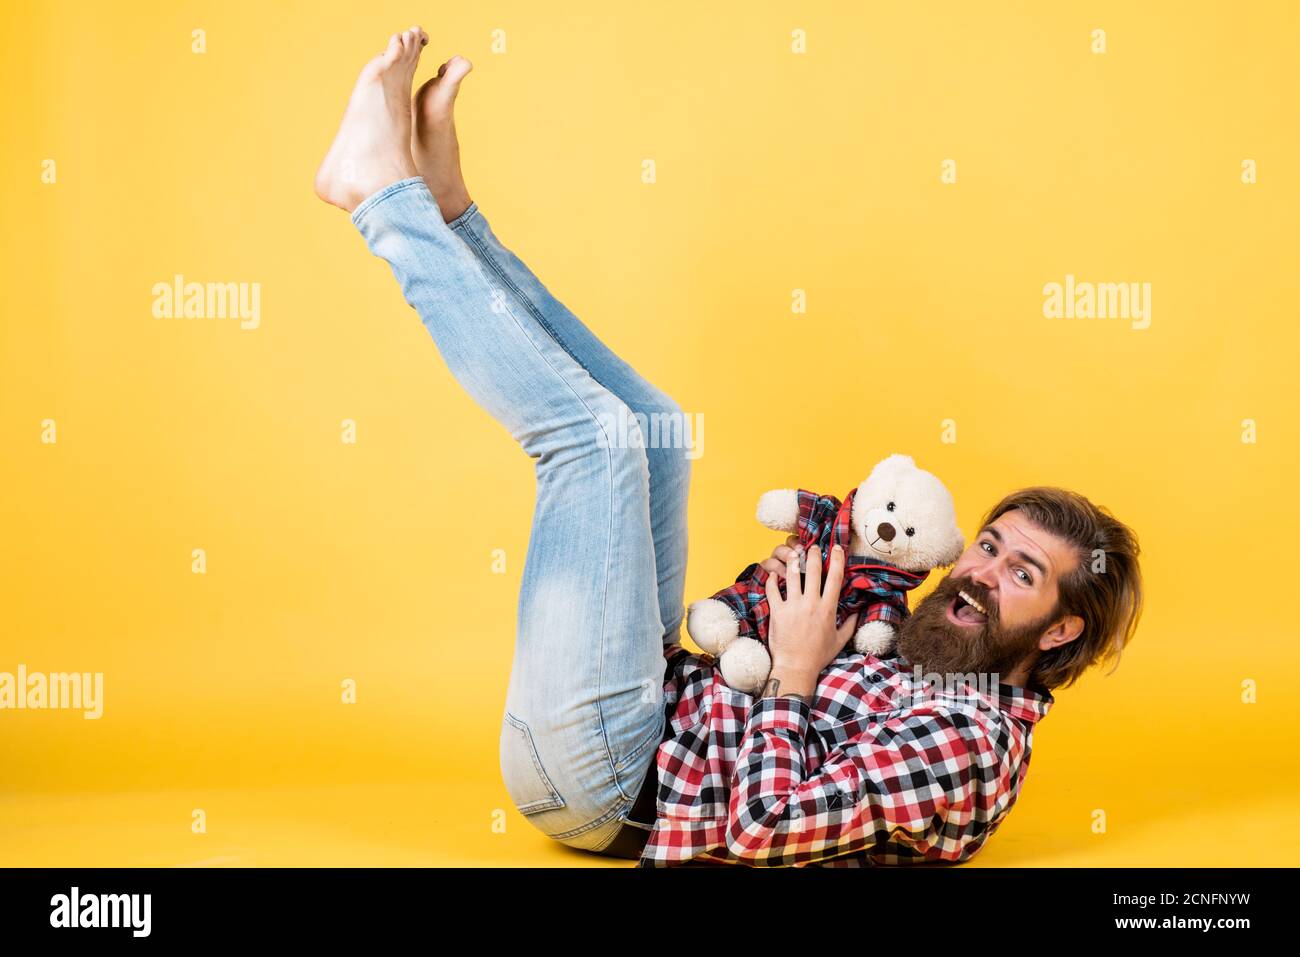 being playful. male feel playful with bear. brutal mature hipster man play with toy. happy birthday. being in good mood. happy valentines day. cheerful bearded man hold teddy bear. Stock Photo